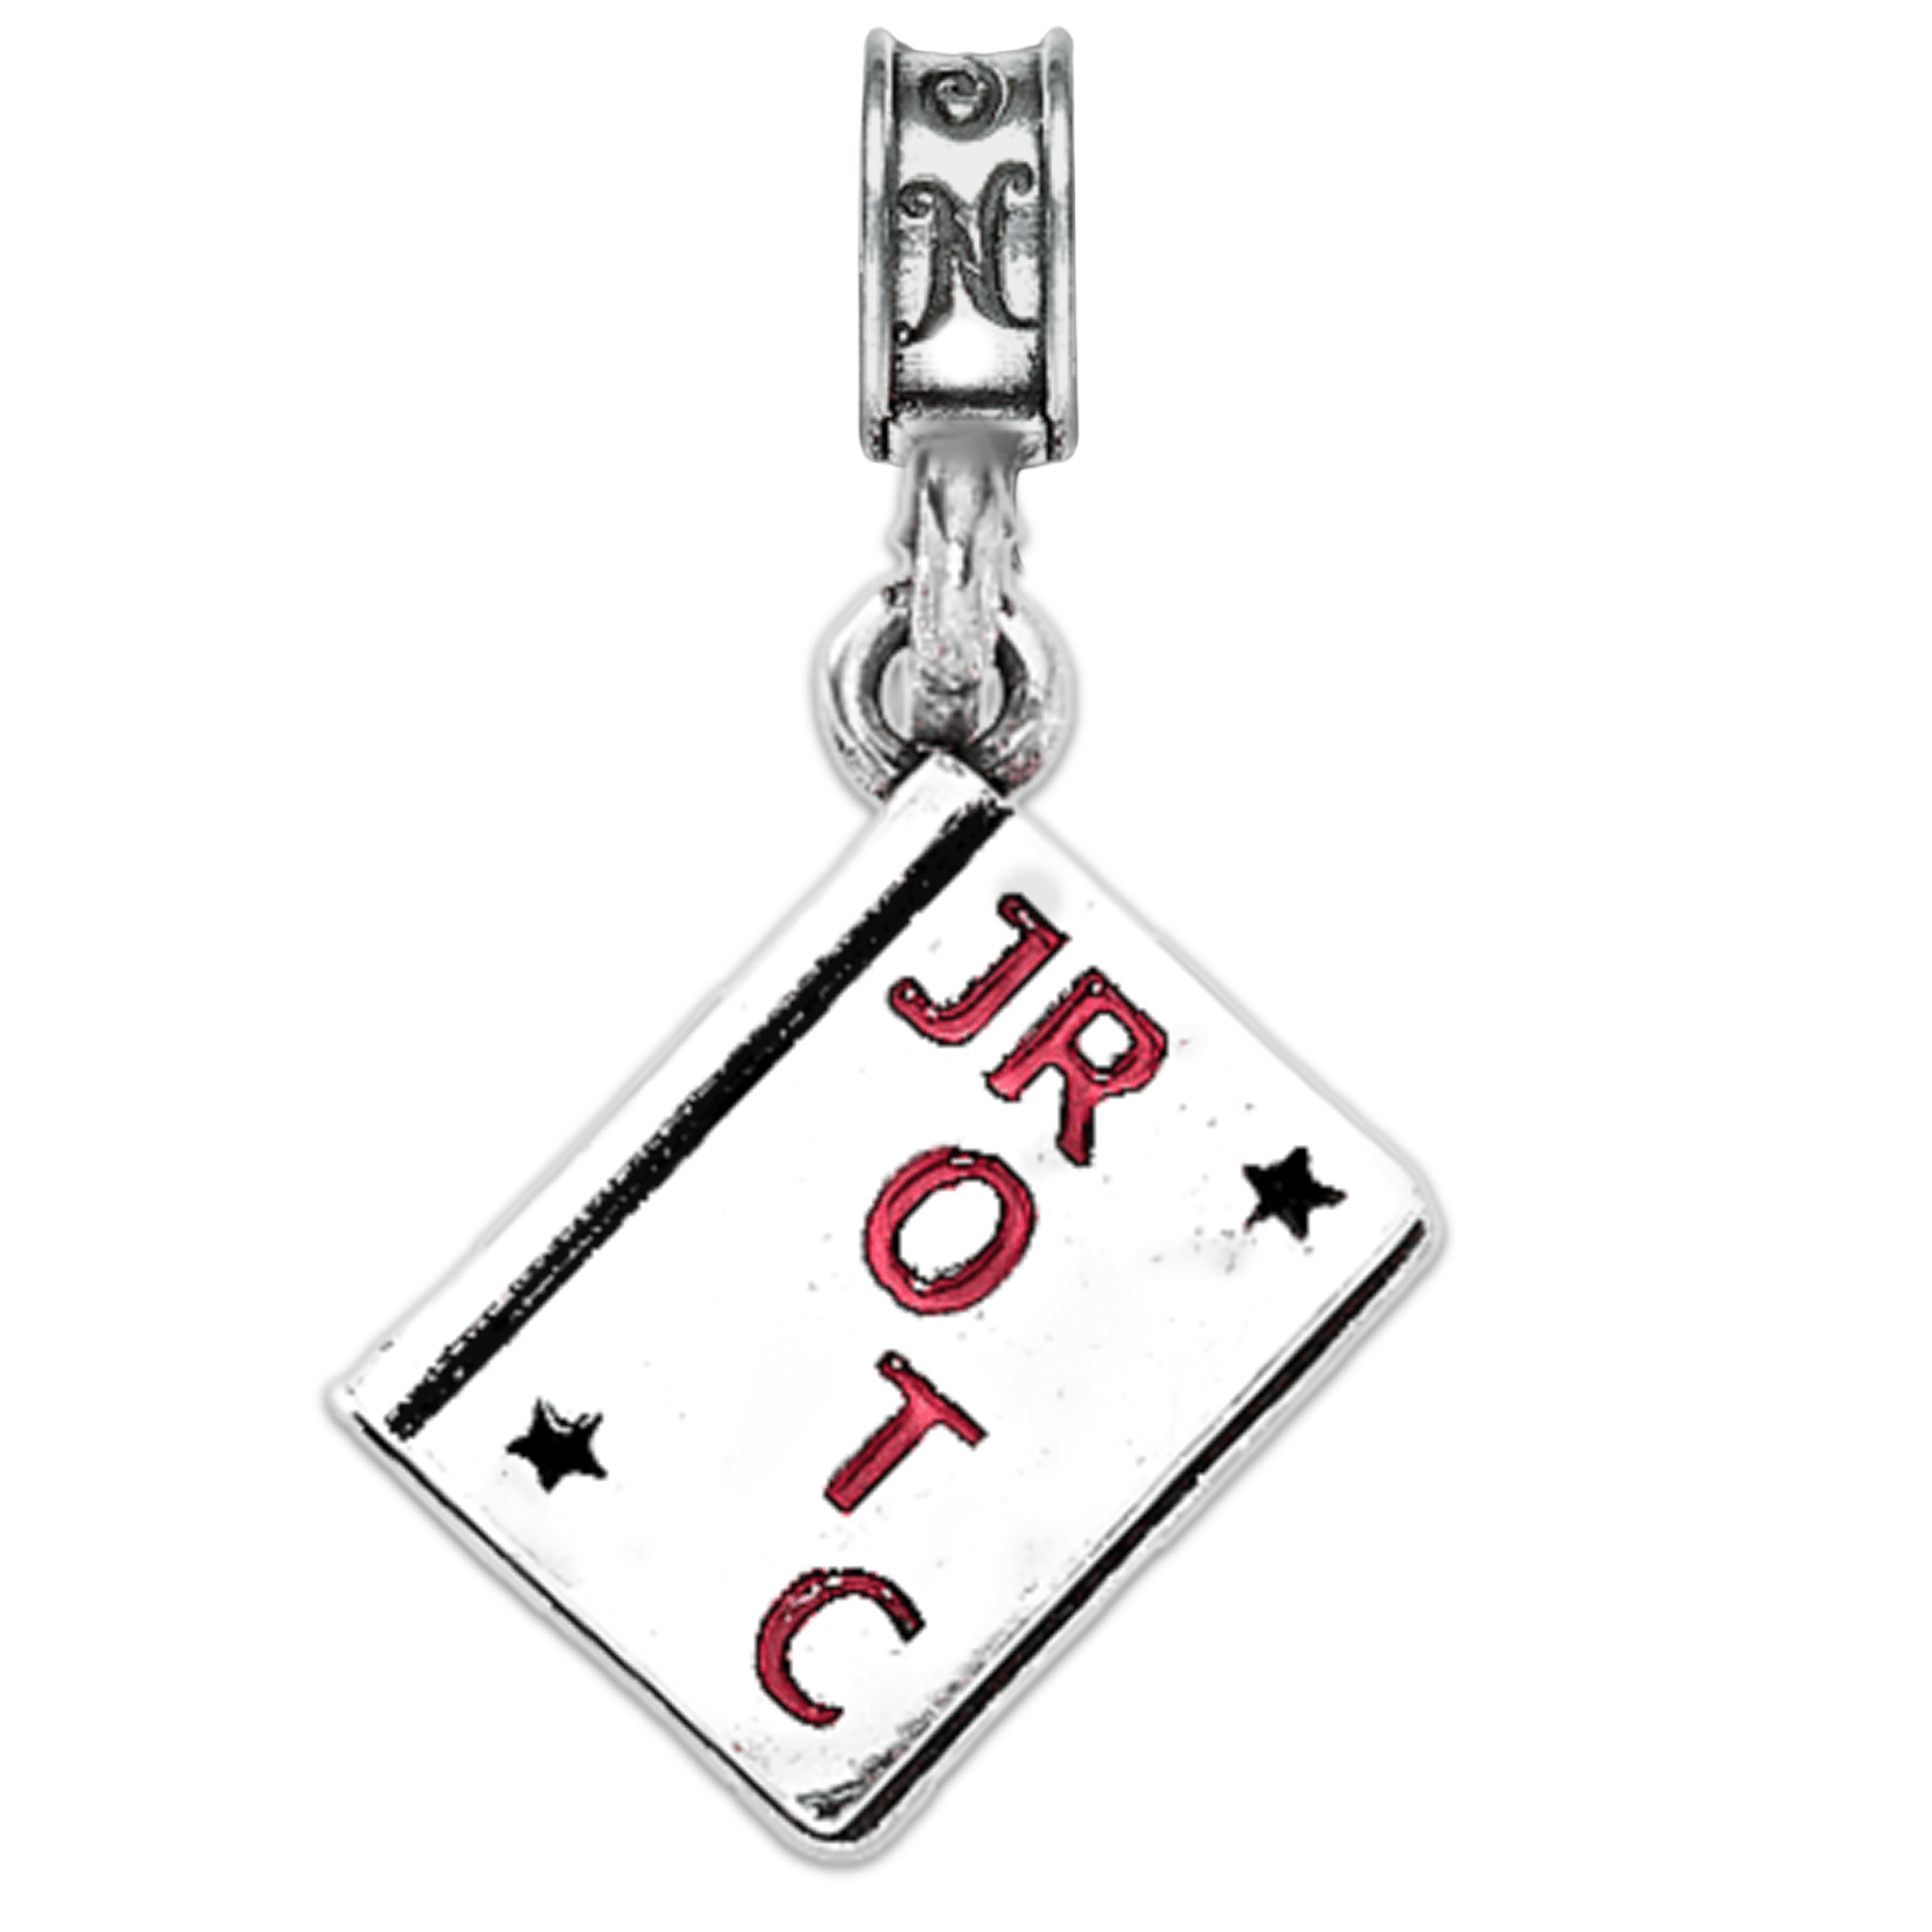 JROTC charm, sterling silver charm, military jewelry, military, charms